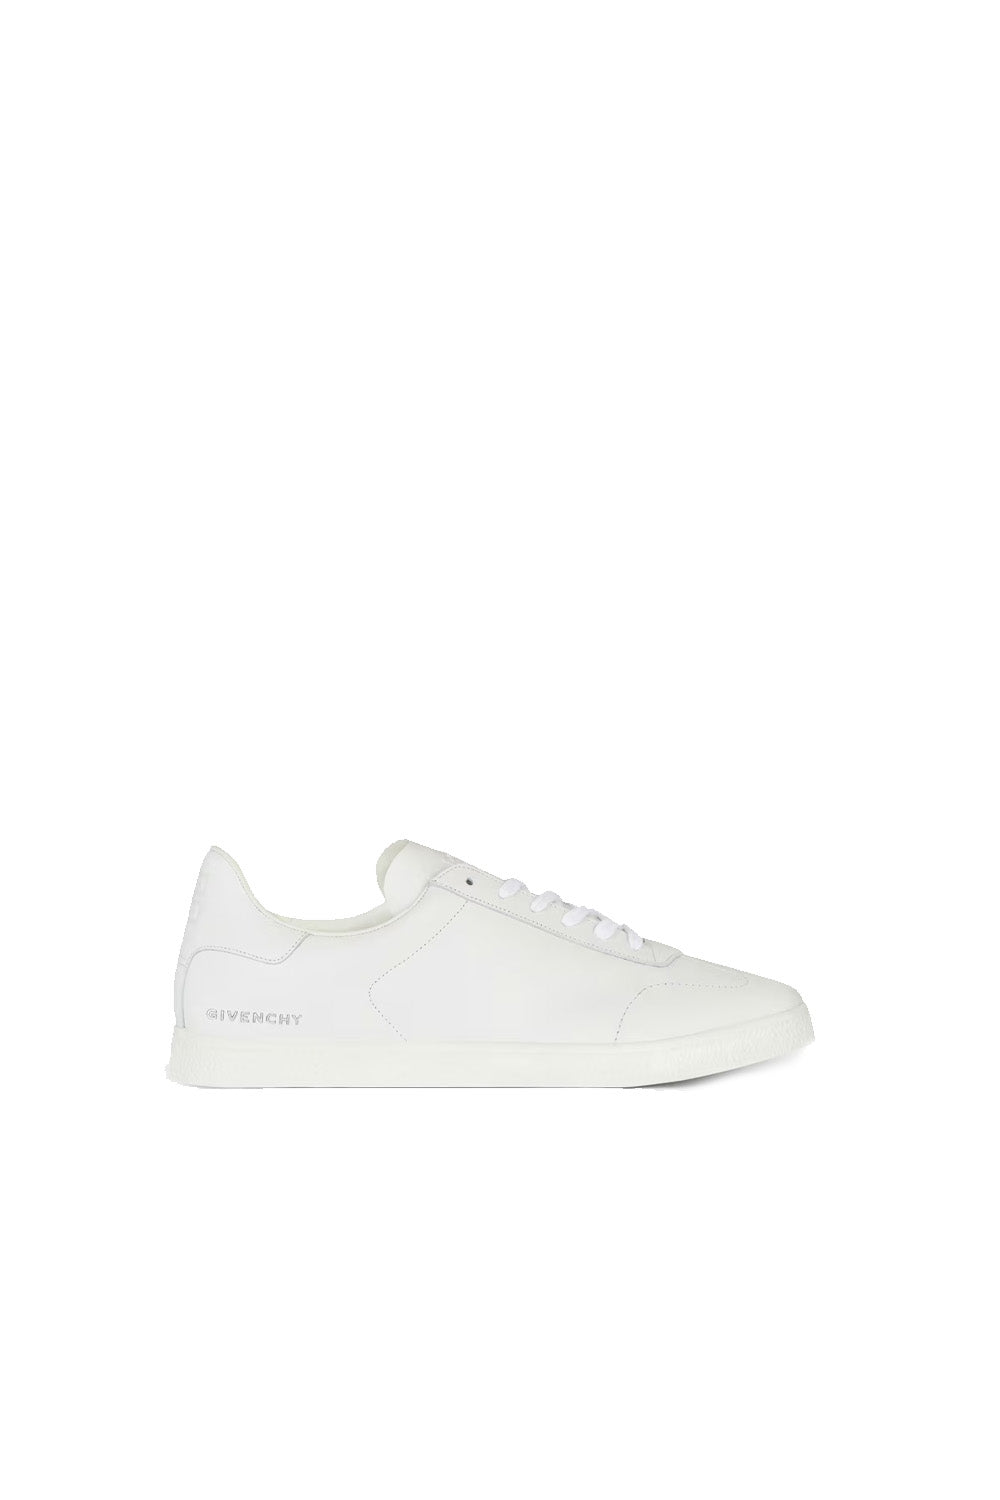 Givenchy Town sneakers in leather